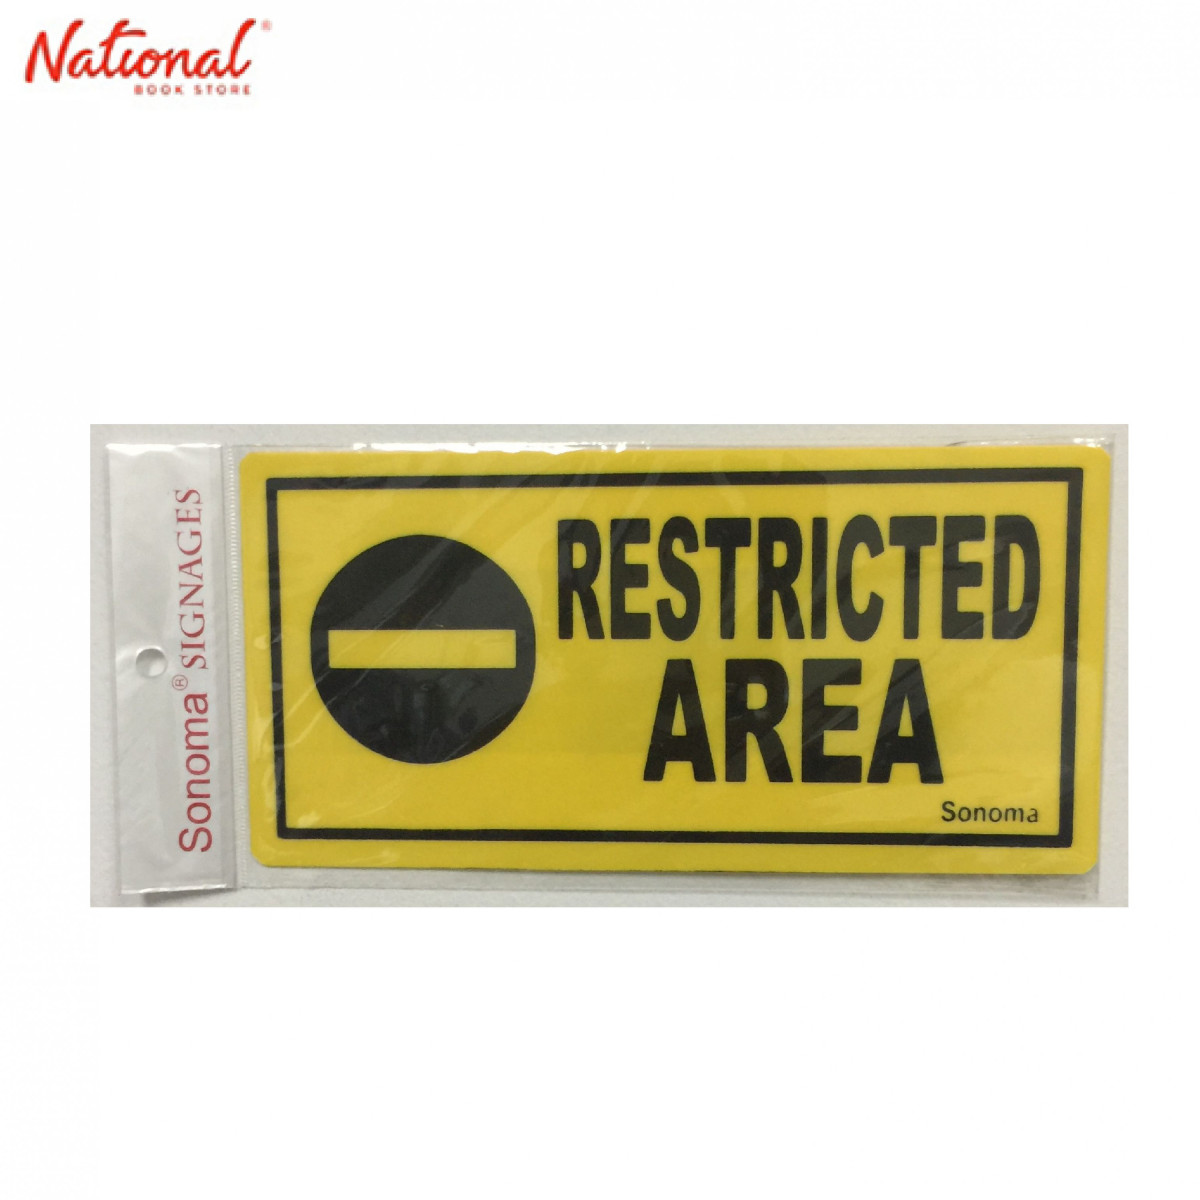 Sonoma Signage 4x8 inches Yellow Restricted Area - Office - Business - Essentials